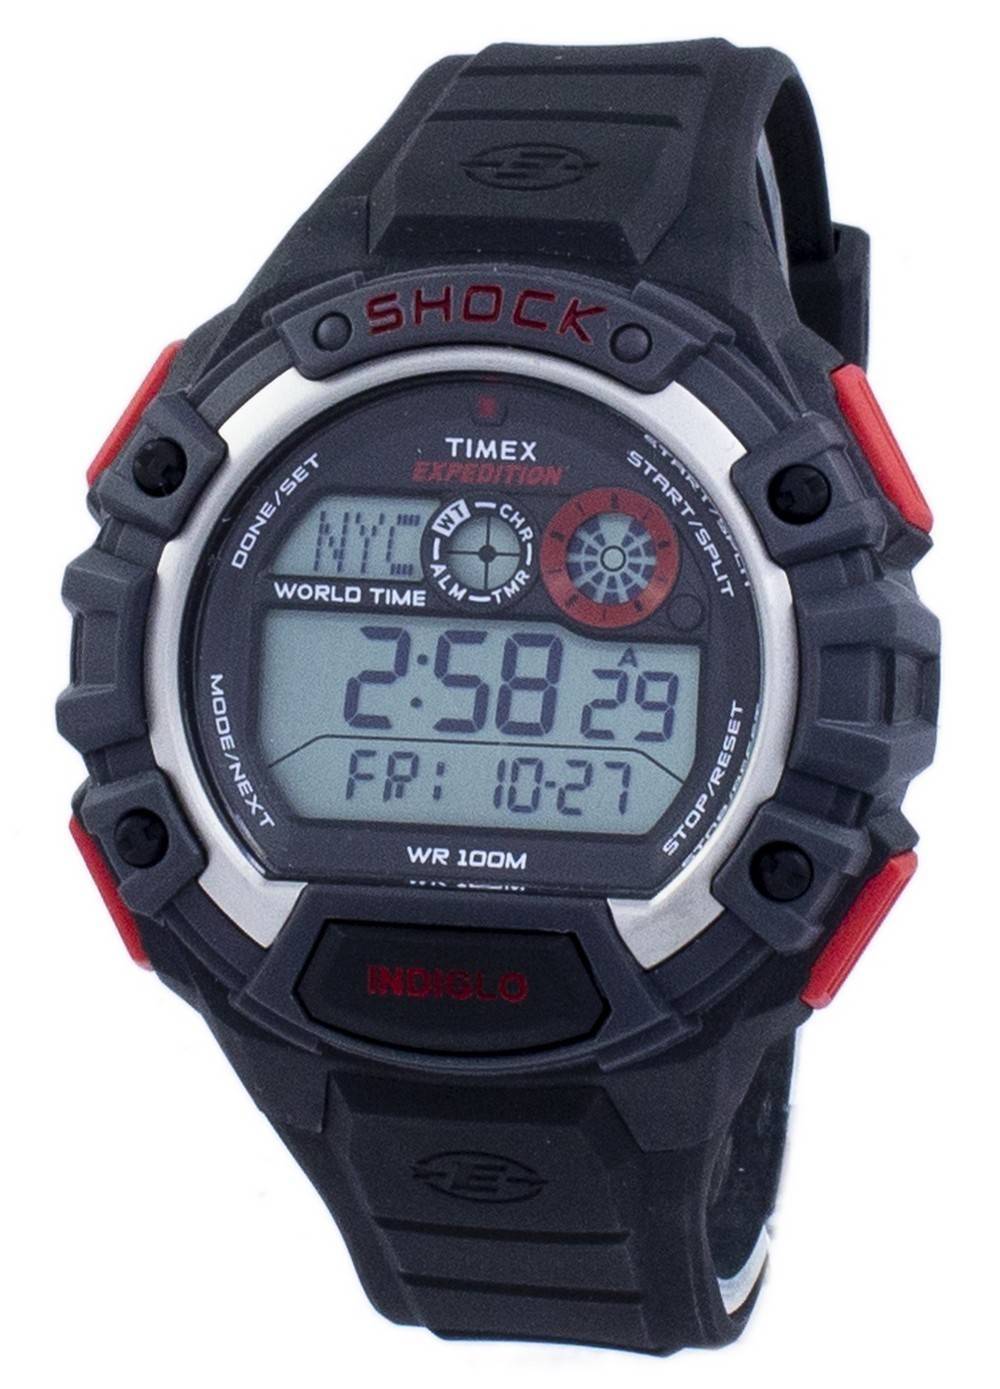 Timex Expedition Global Shock World Time Alarm Indiglo Digital T49973 Men's  Watch